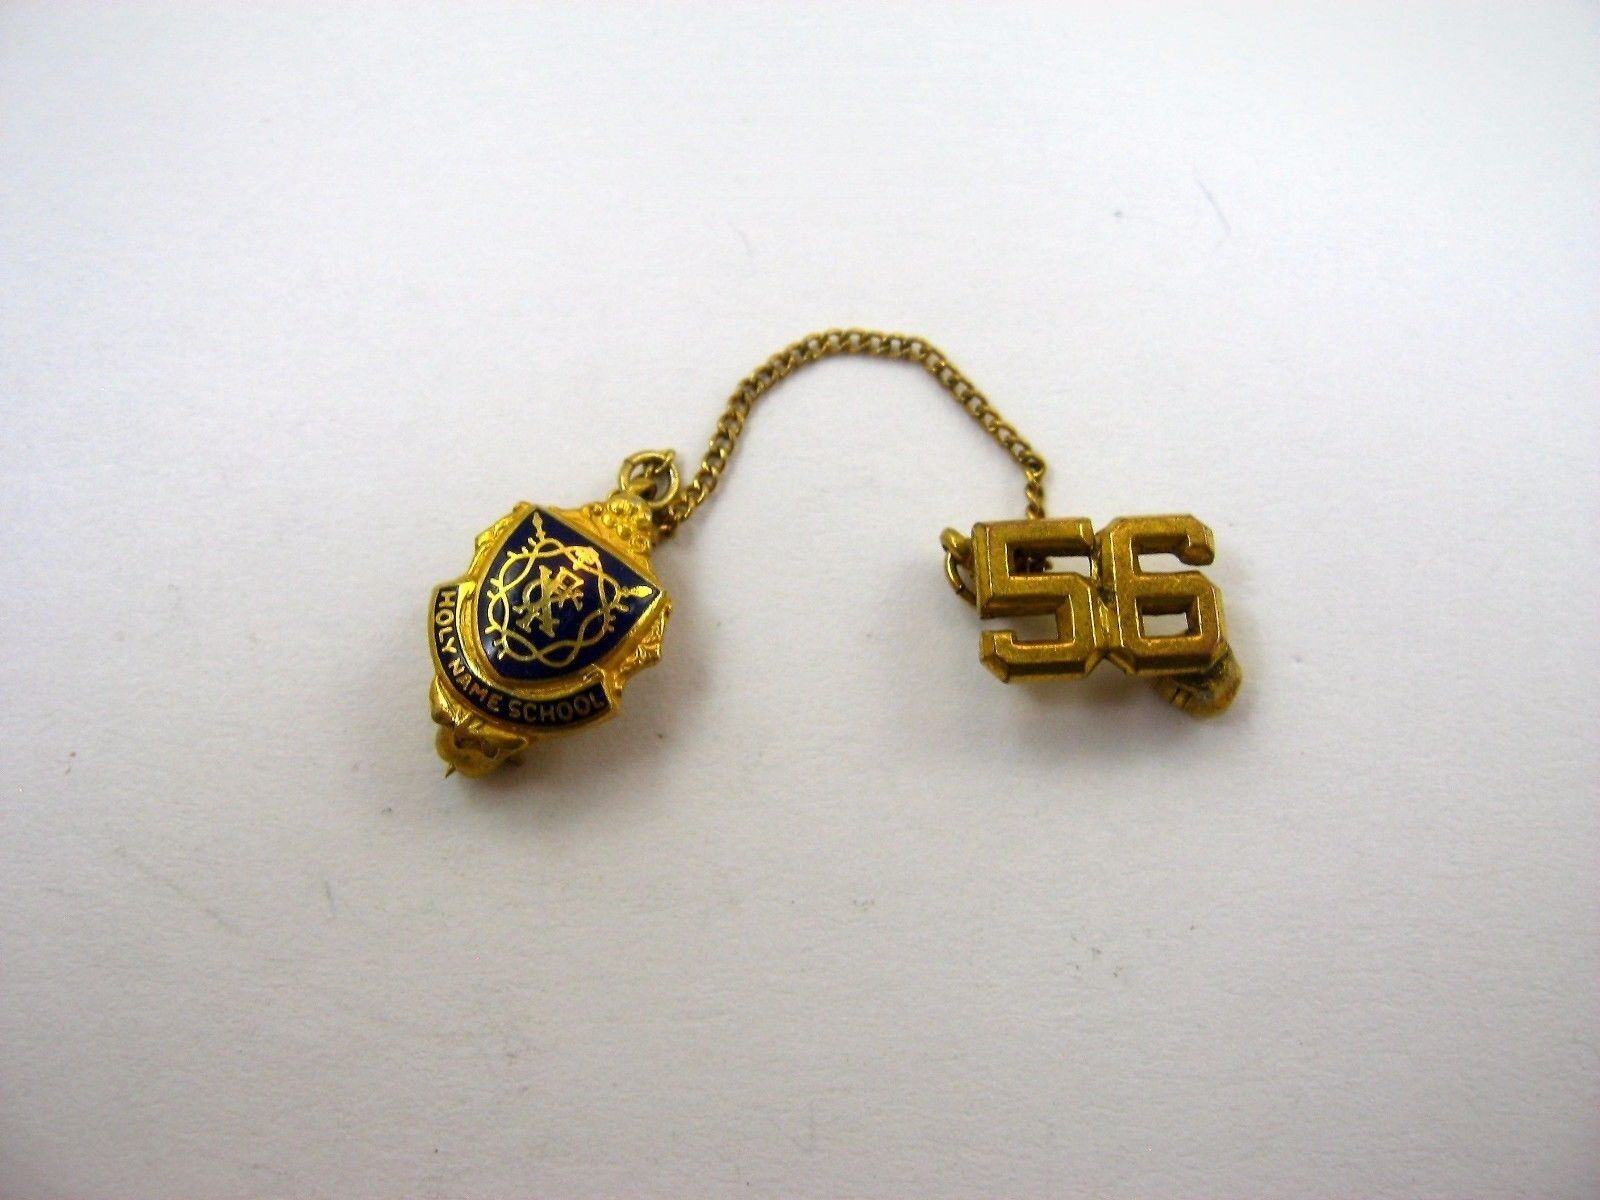 Vintage Collectible Pin: Beautiful HOLY NAME SCHOOL 1956